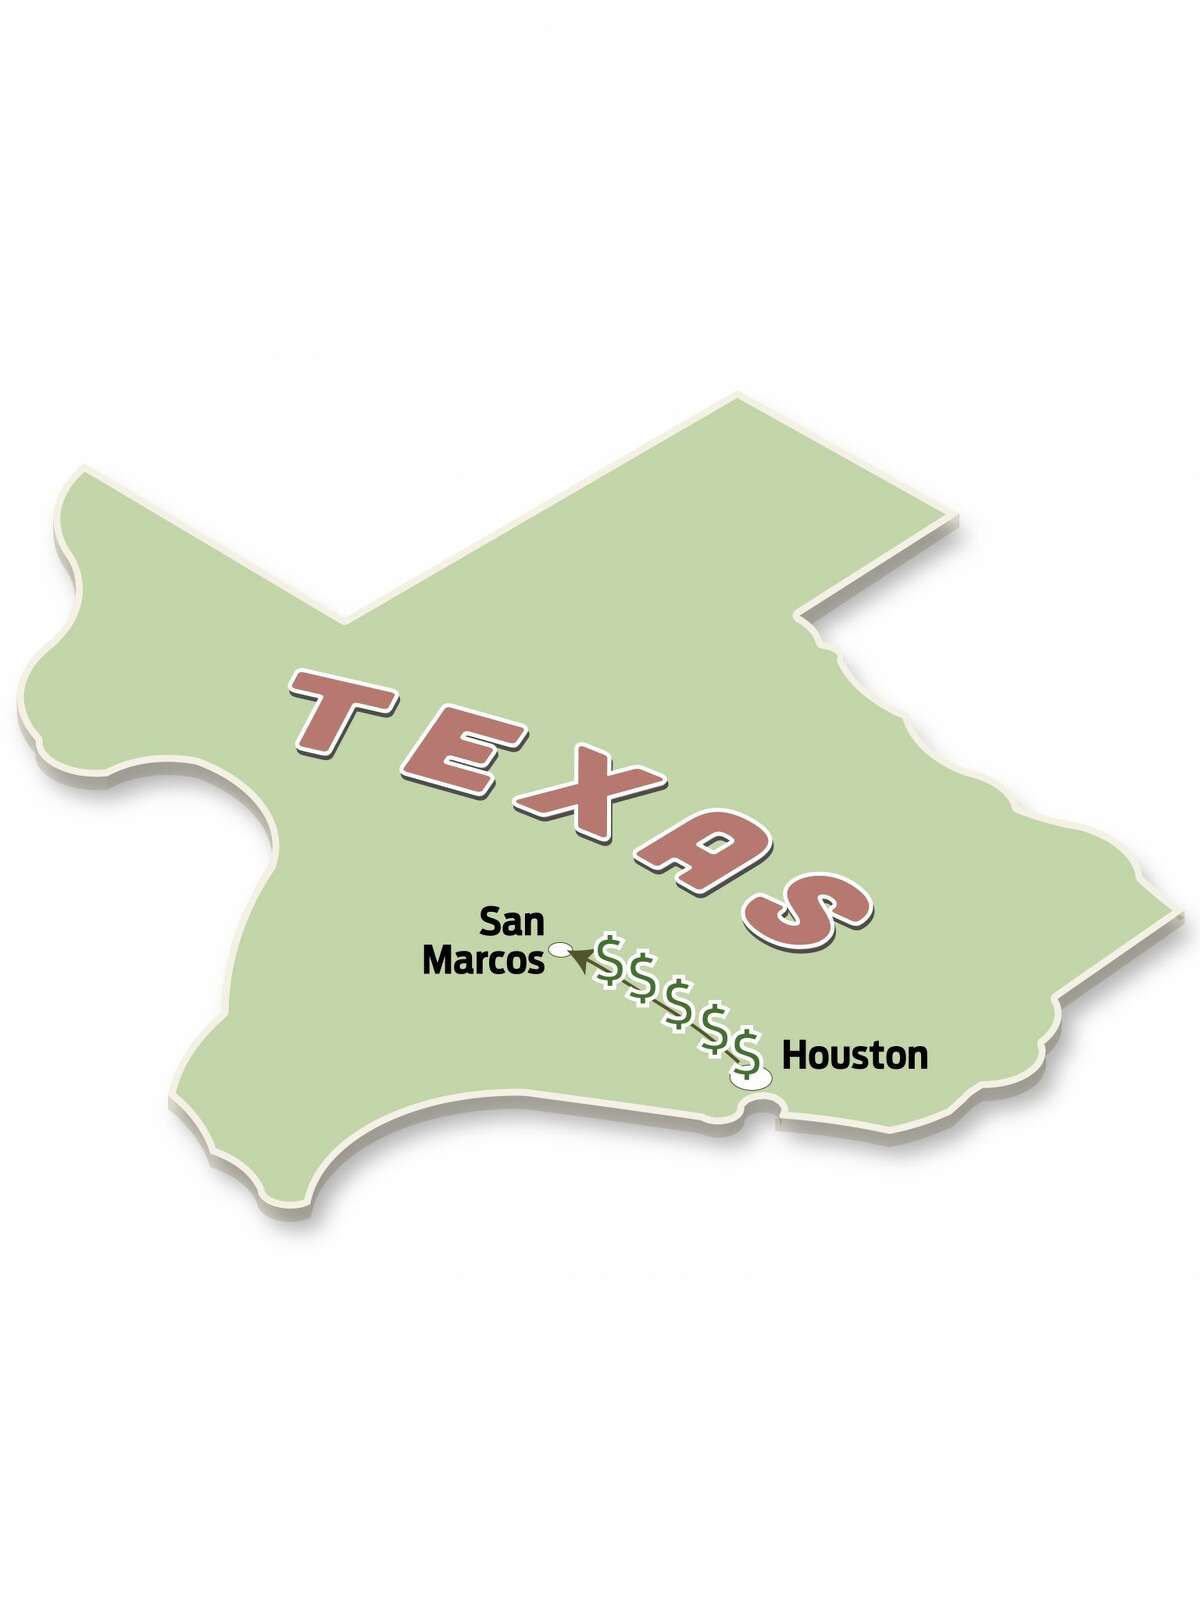 Tilted map of Texas, arrow with dollar signs flowing from Houston to San Marcos